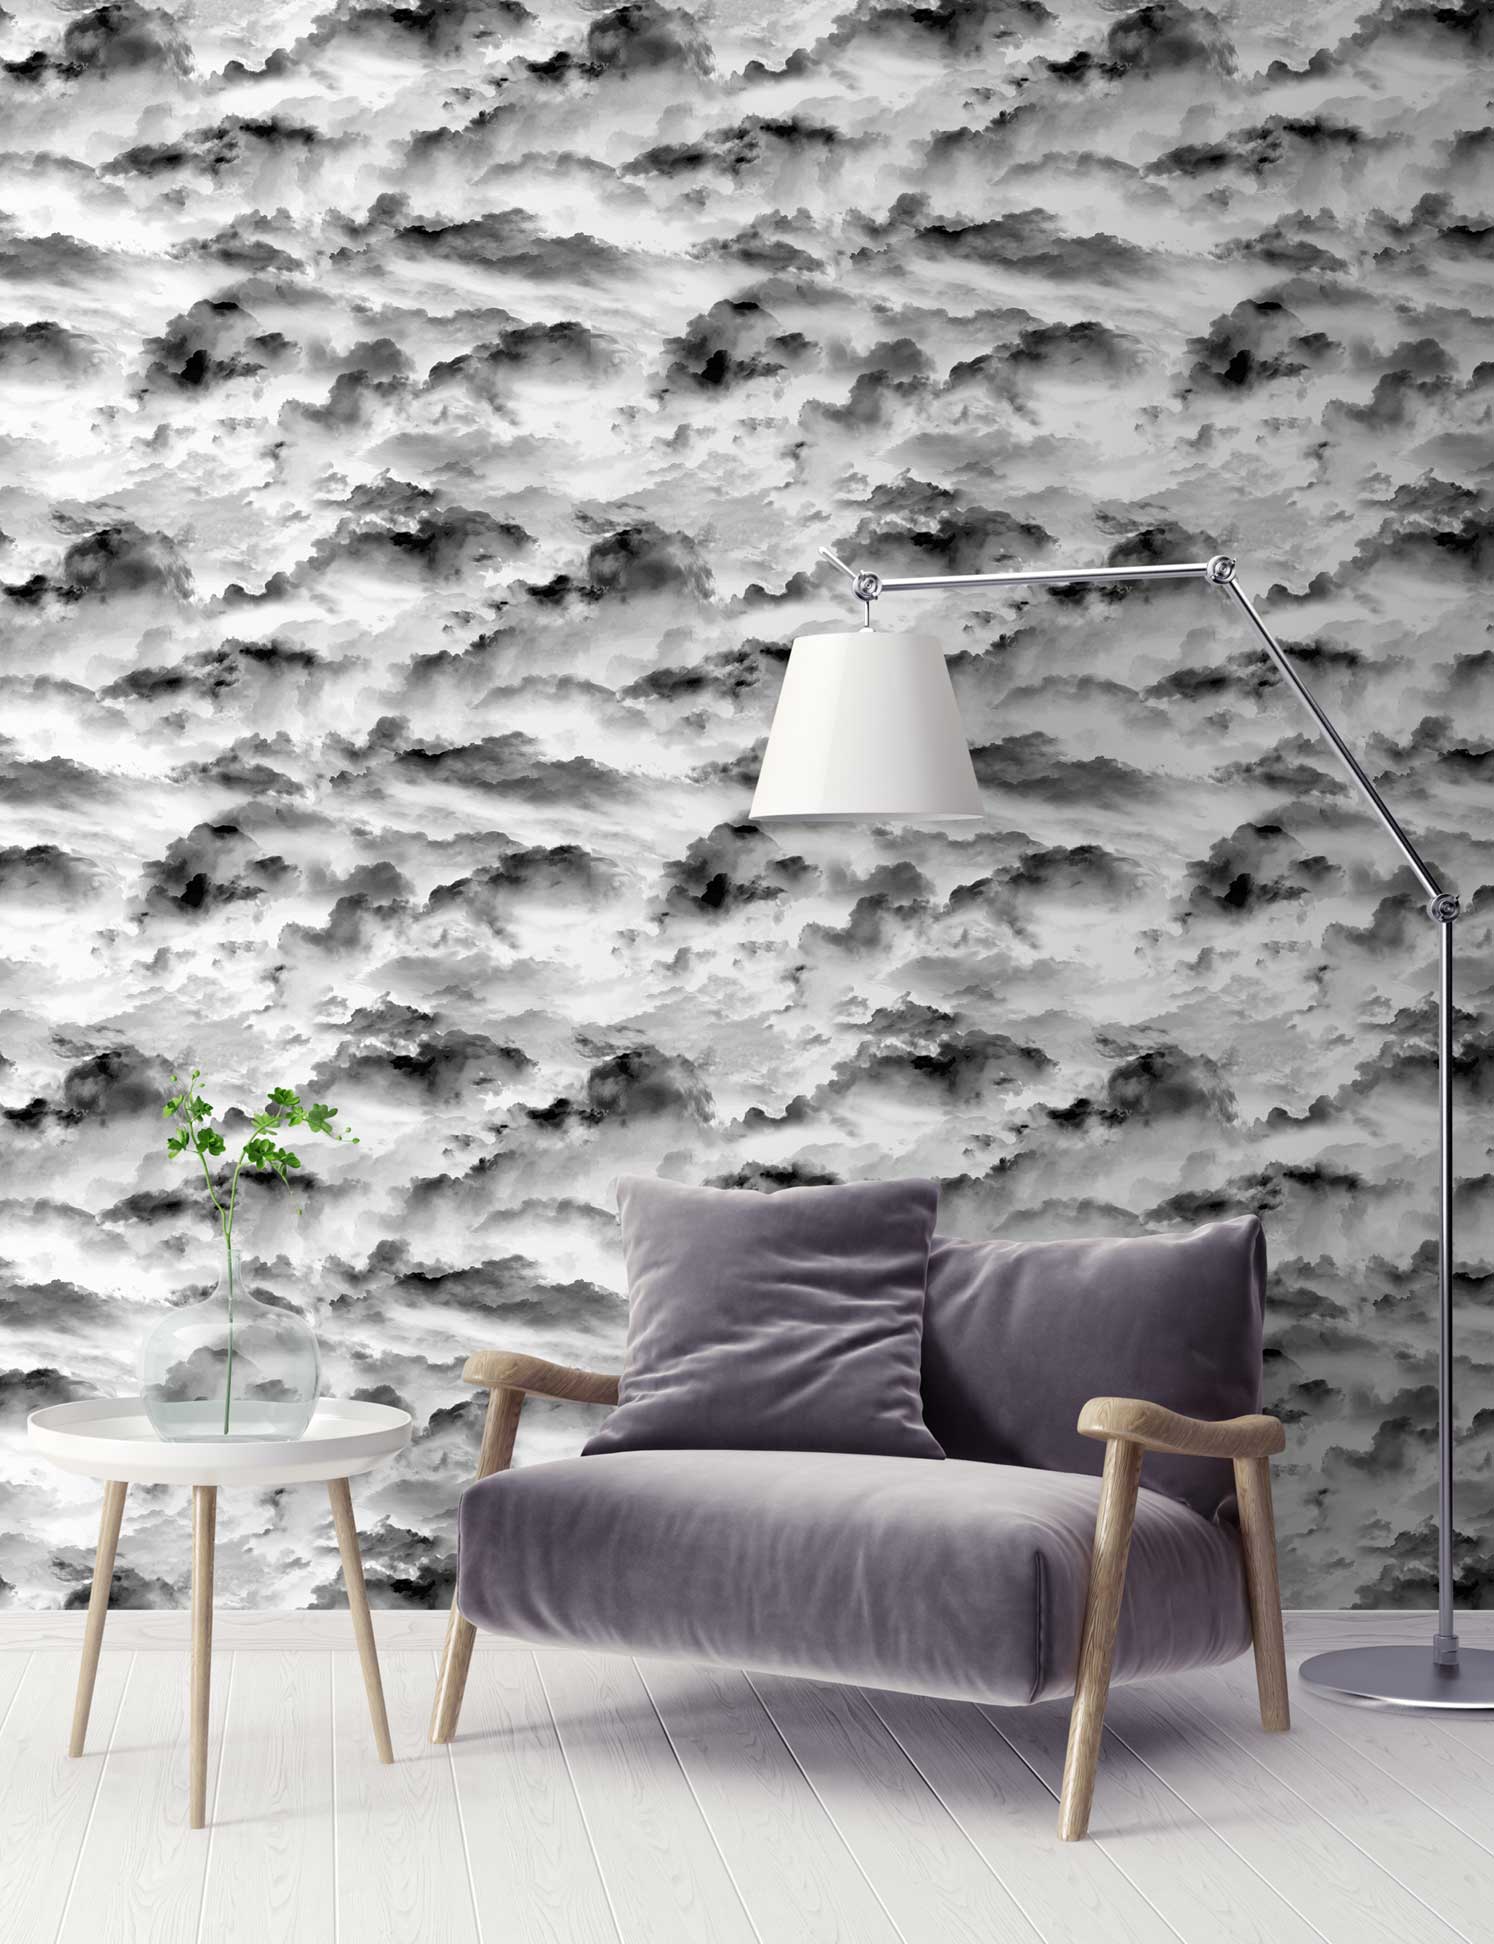 The Dark side - 40 black wallpapers to make a bold statement